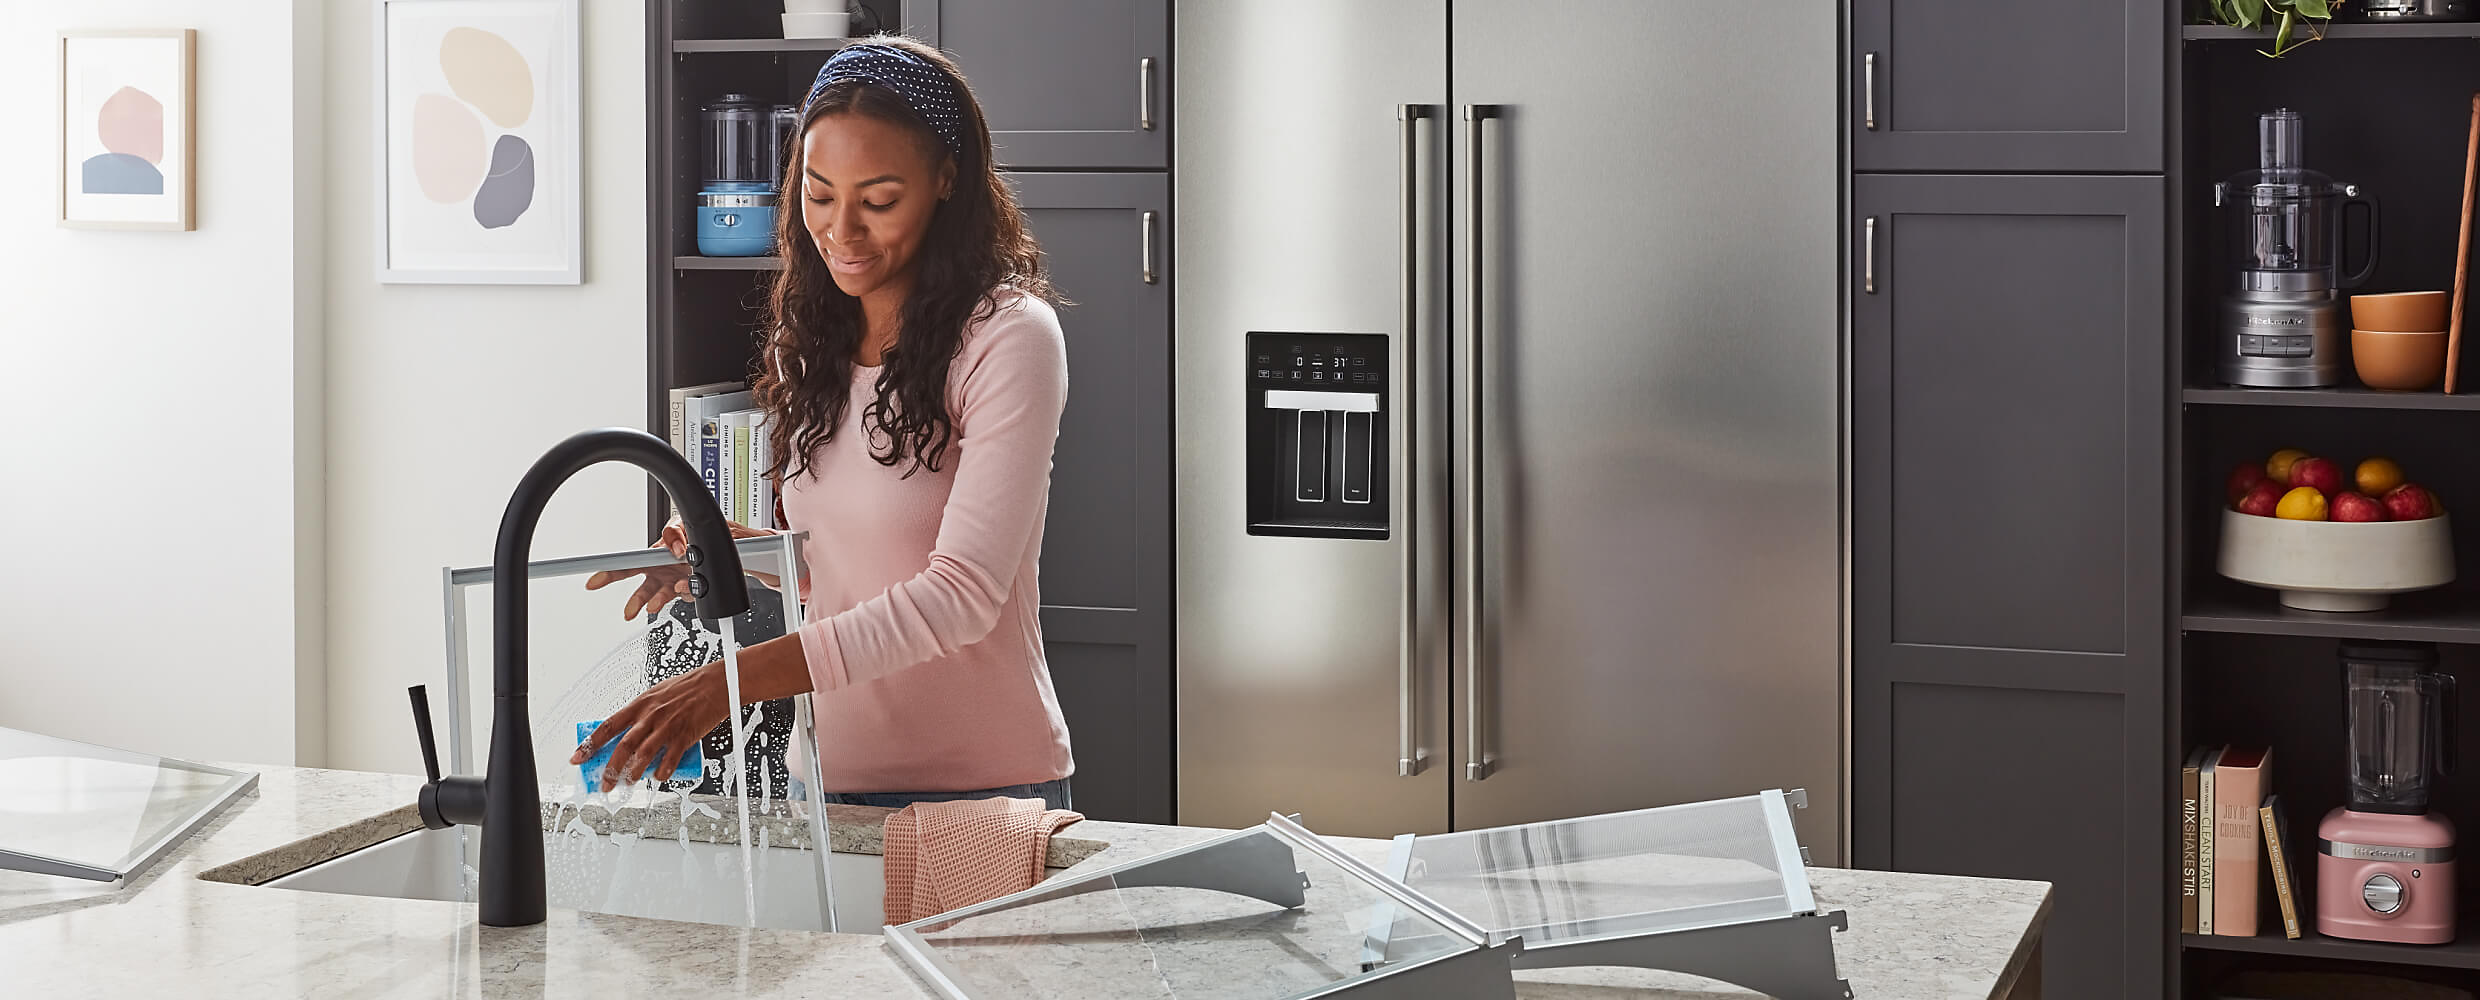 42" KitchenAid® Built-In Side-by-Side Refrigerator featured in the kitchen with a maker rinsing the bins and shelves